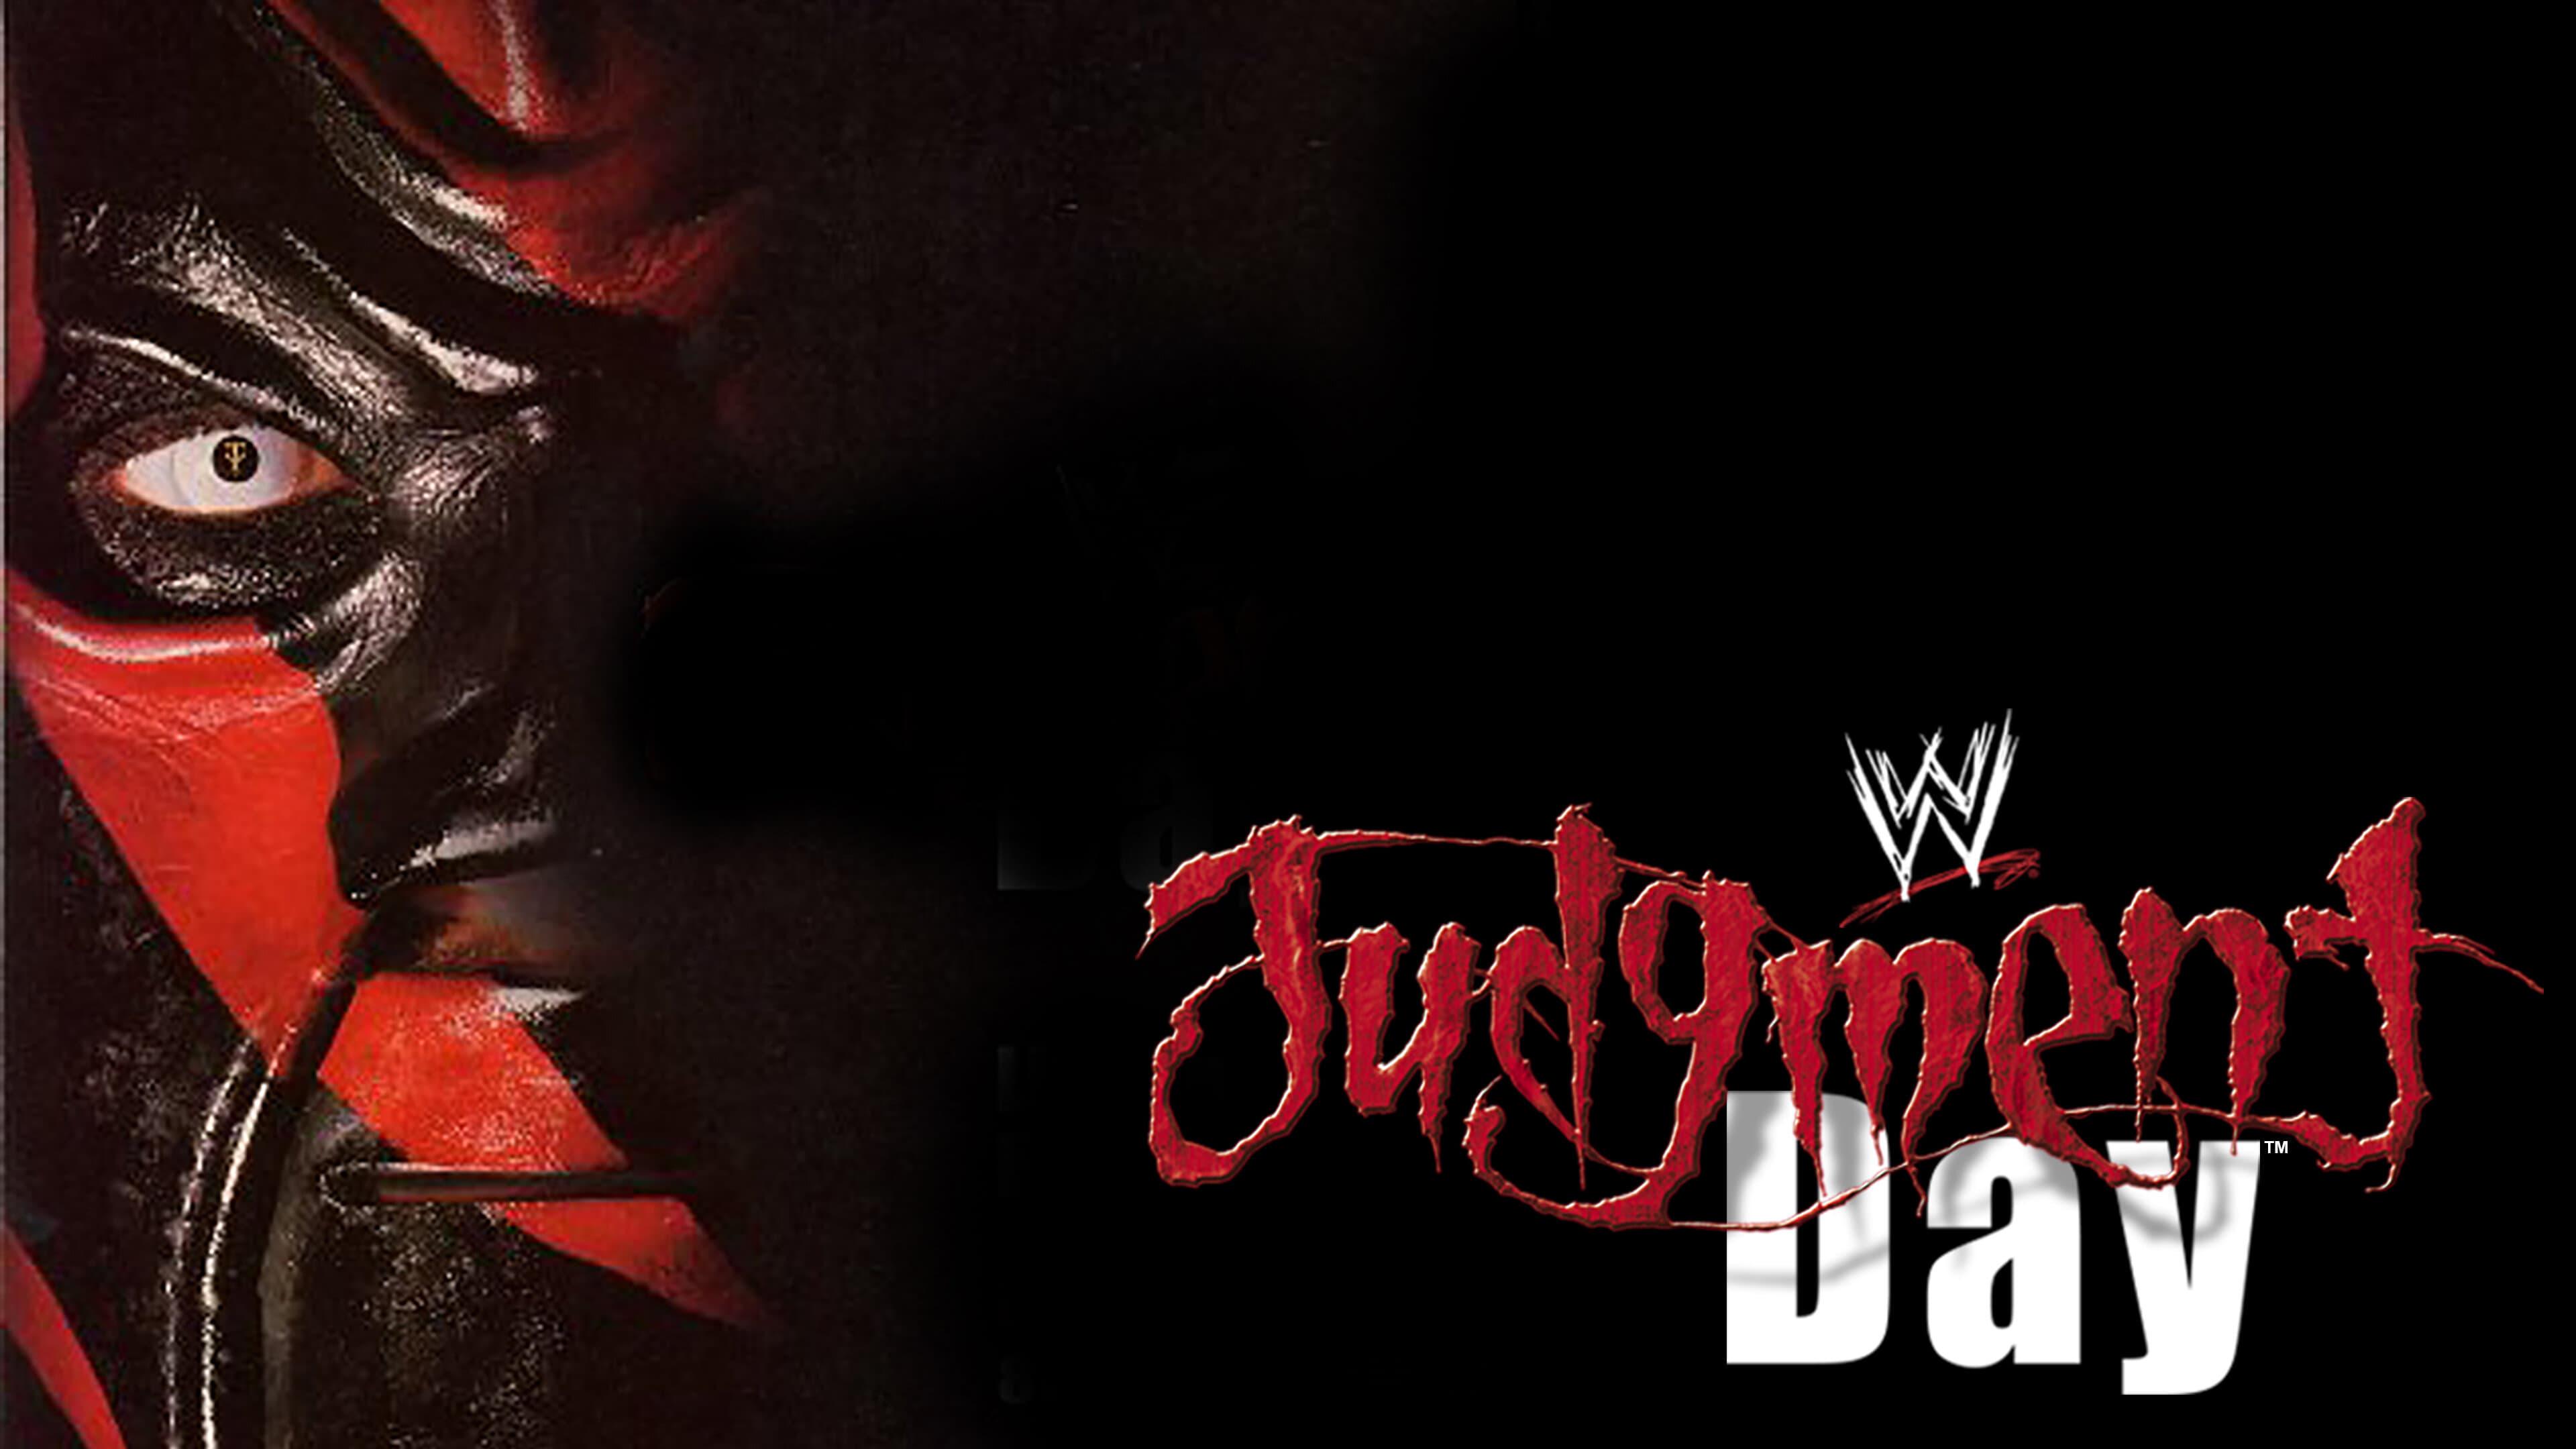 WWE Judgment Day 2000 backdrop